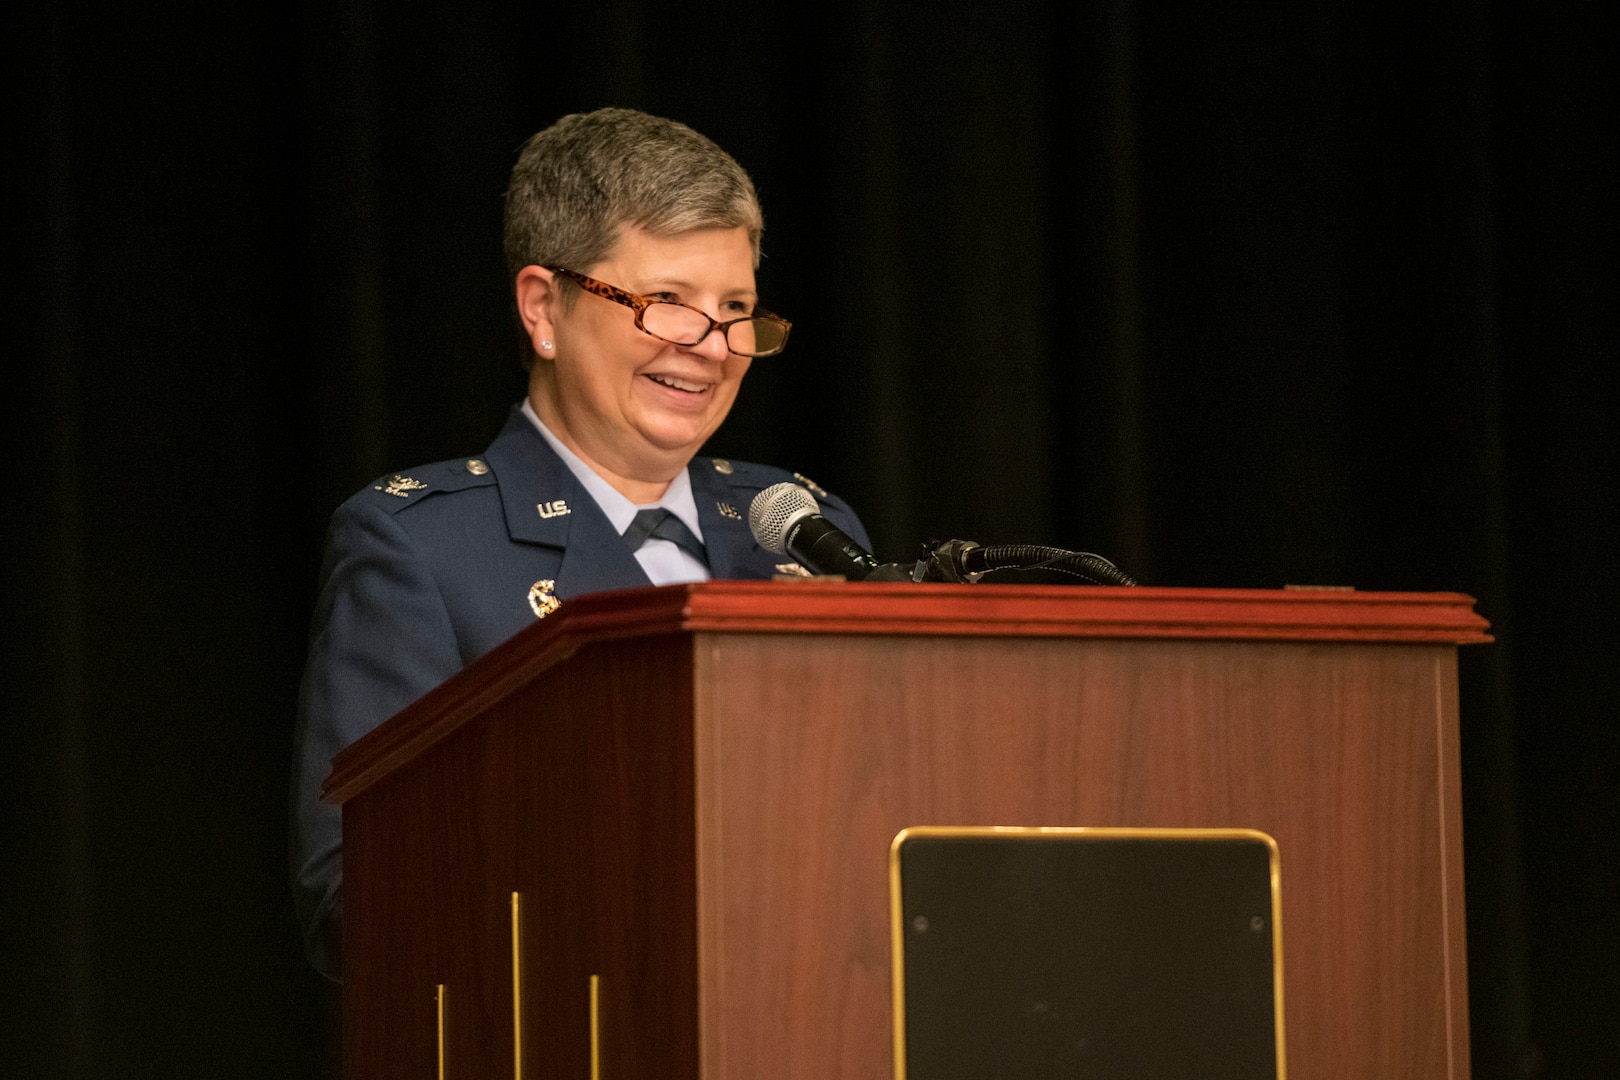 Col. Heidi A. Paulson, Air Force Manpower Analysis Agency commander, officiates over the 1st Manpower Requirements Squadron inactivation ceremony, Jan. 9, 2020, at Joint Base San Antonio-Randolph, Texas. The 1st MRS was constituted April 2, 1976, as the Air Force Personnel Management Engineering Team and redesignated as the 1st Manpower Requirements Squadron Dec. 1, 2004. It is now a division under the Manpower Management Operations Directorate in the Air Force Manpower Analysis Agency.